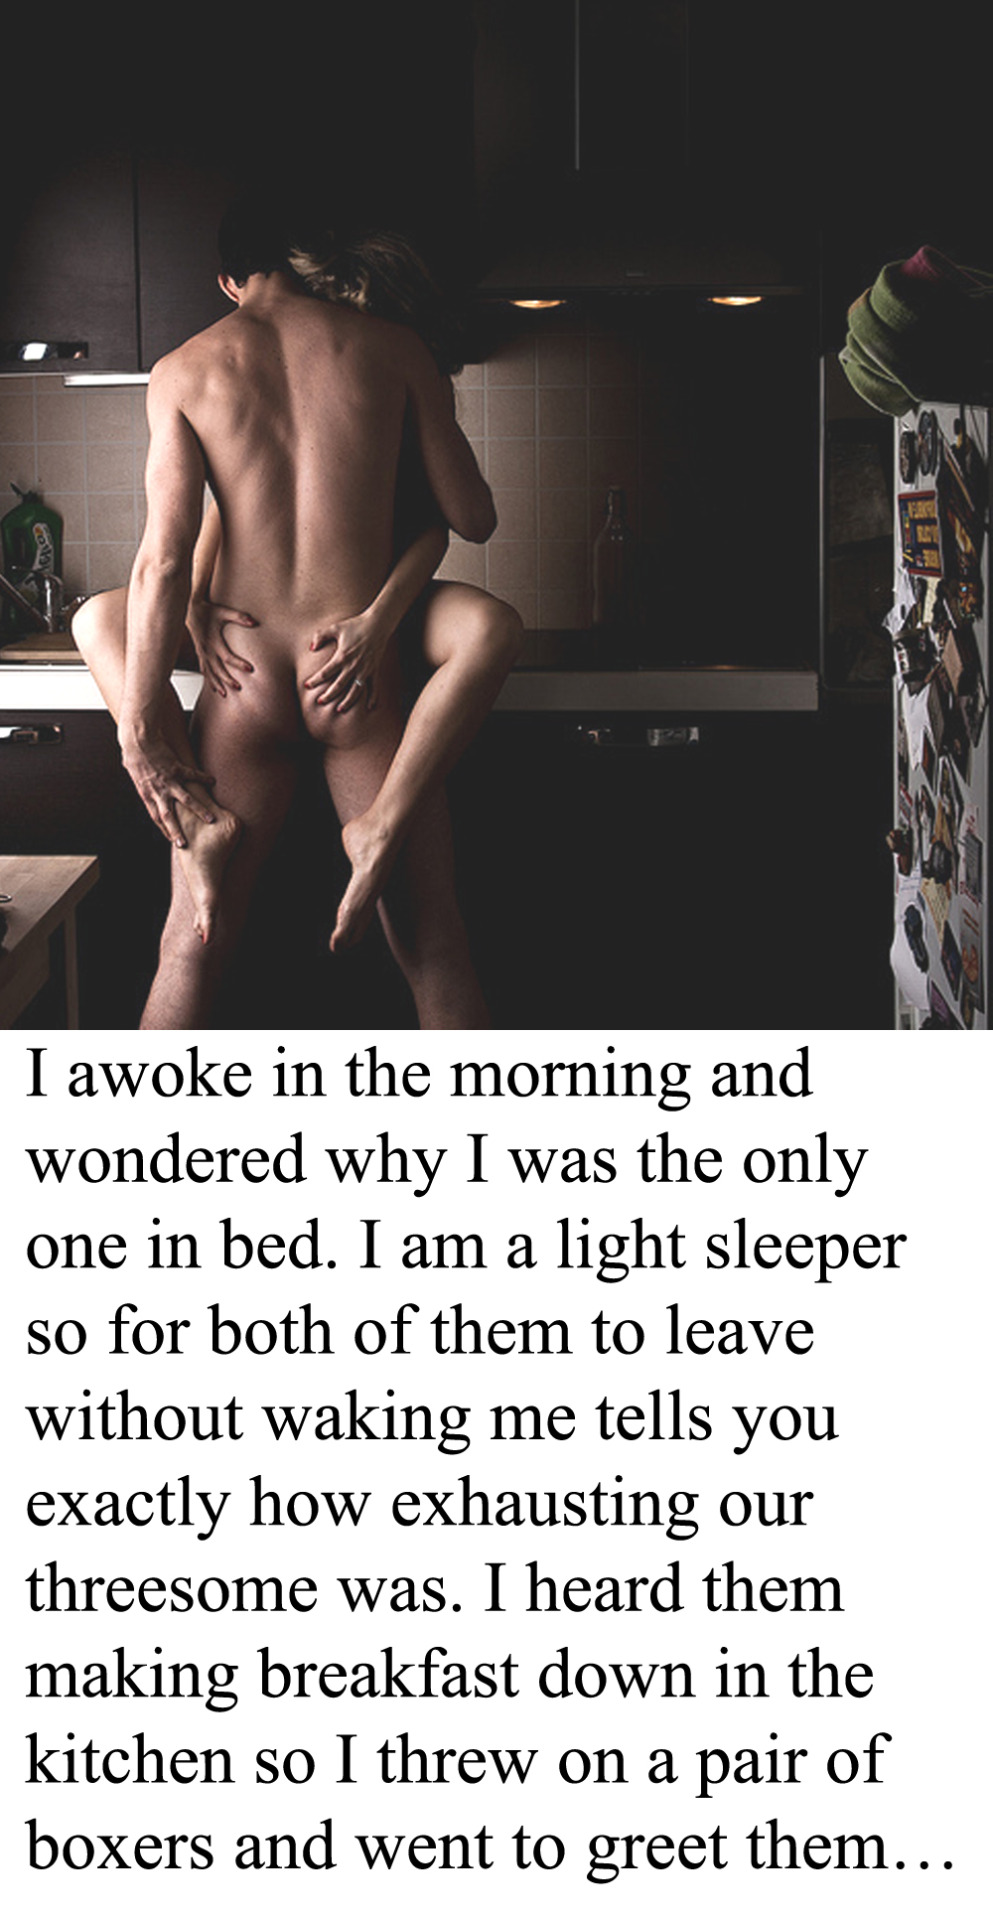 myeroticbunny:  I awoke in the morning and wondered why I was the only one in bed.